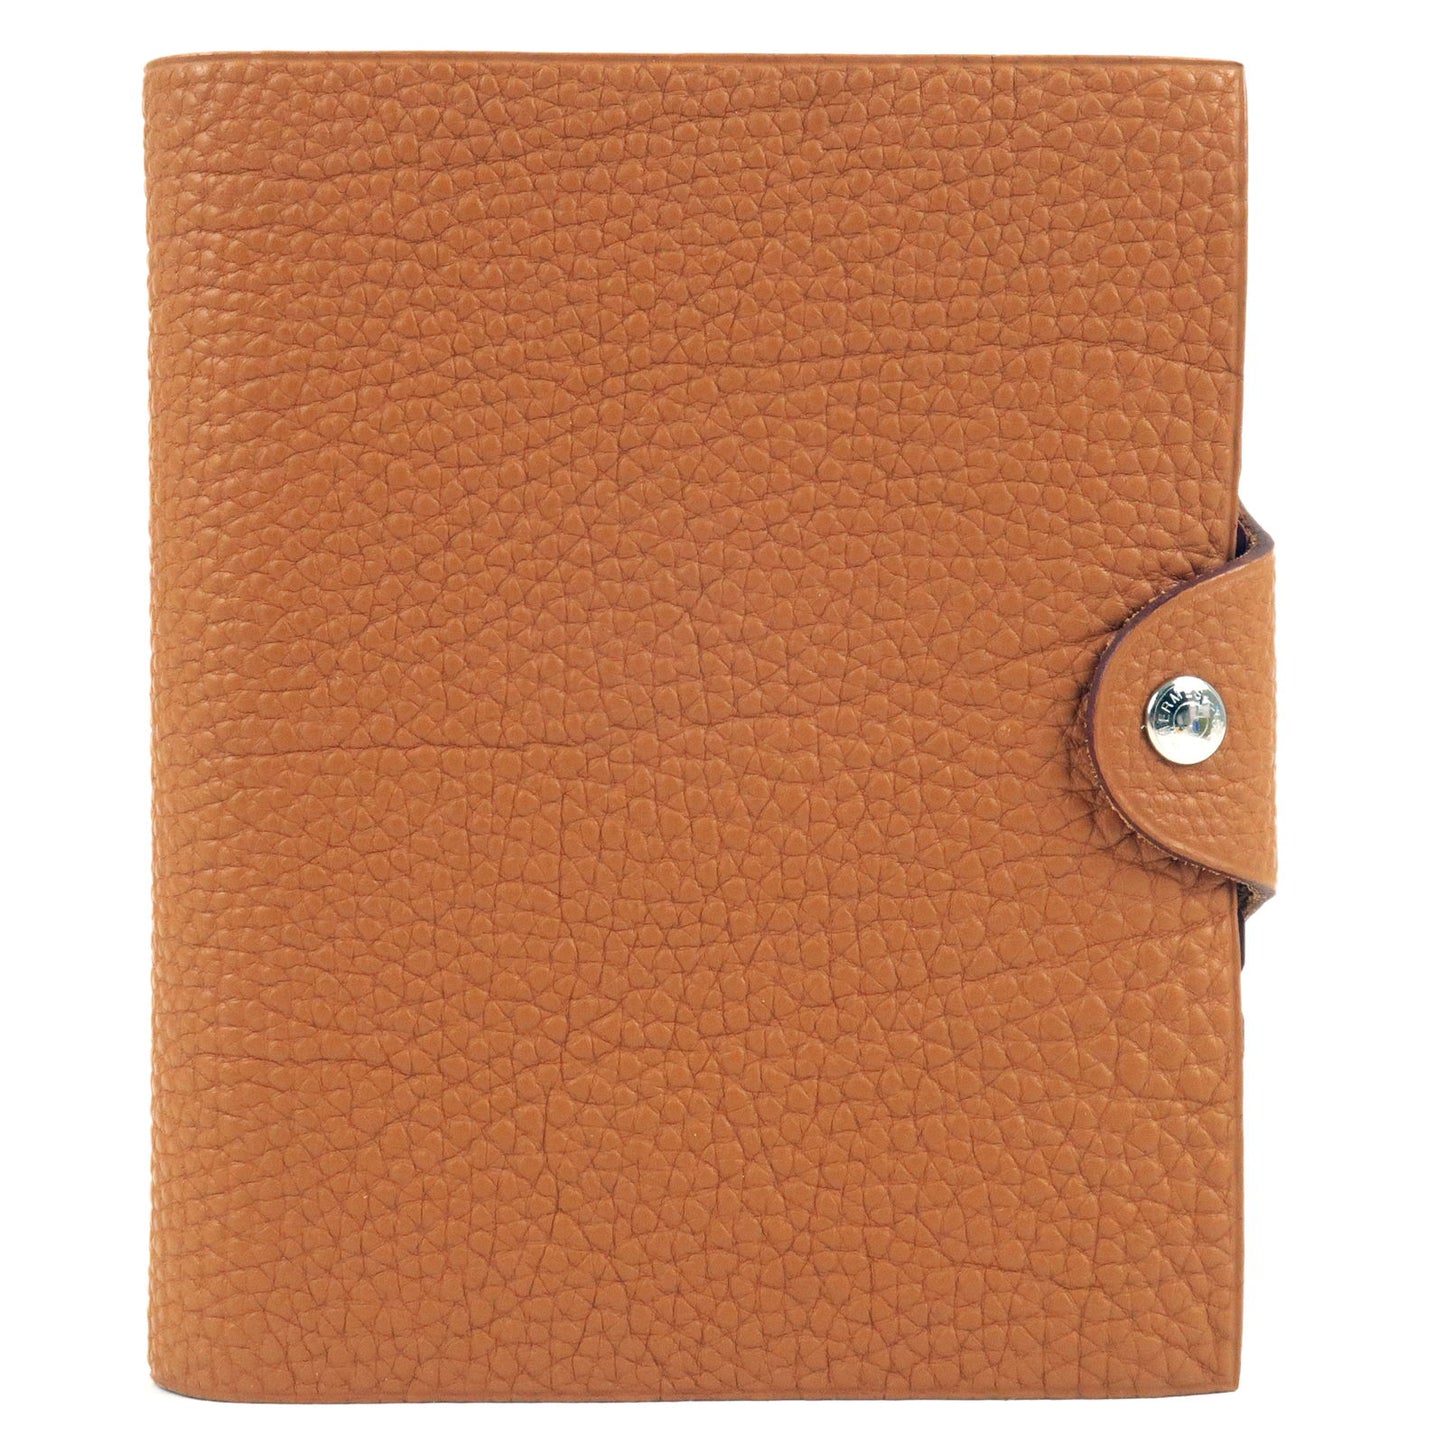 HERMES-Taurillon-Clemence-Ulysse-PM-Planner-Cover-Brown-J-Stamp